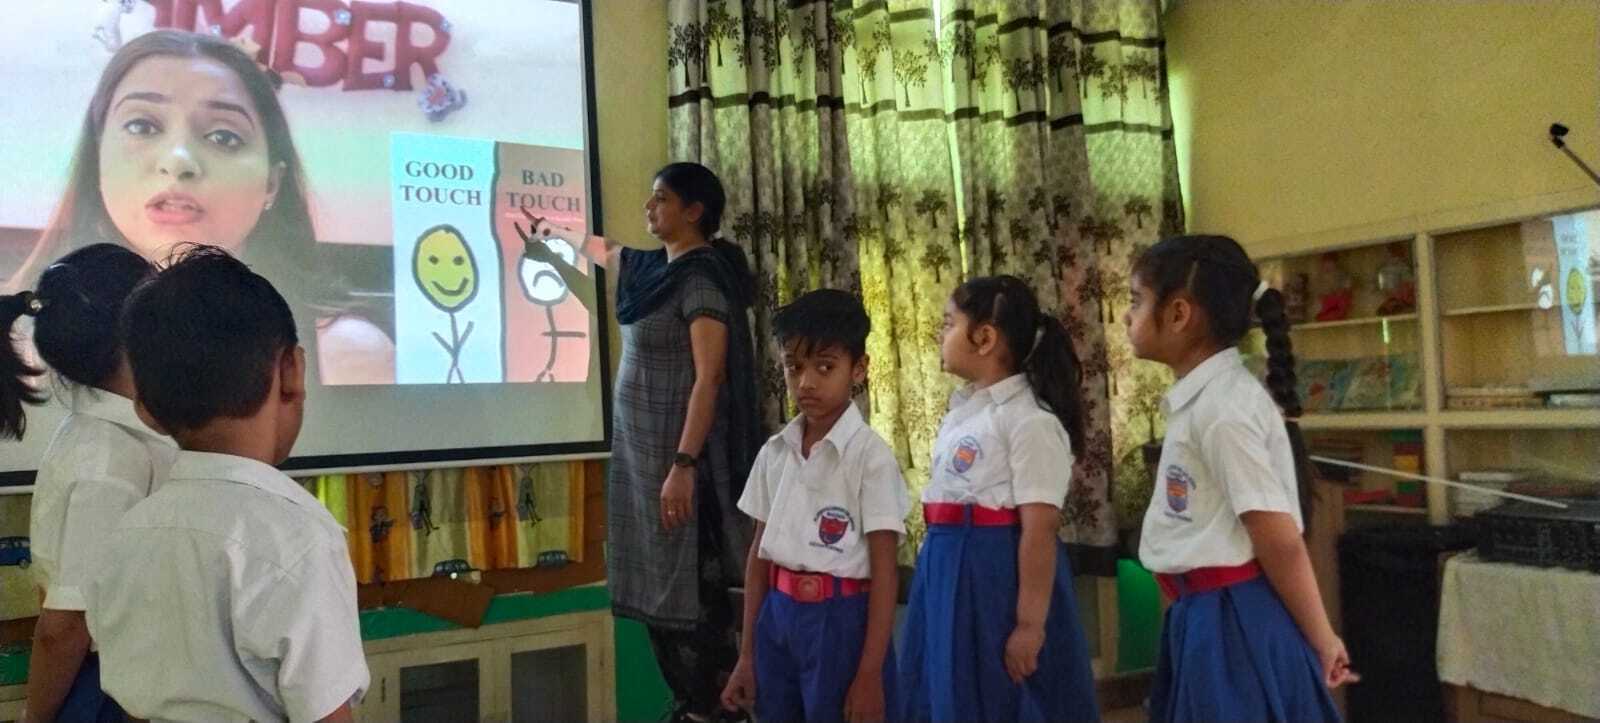 Educating children on good touch and bad touch-Class I